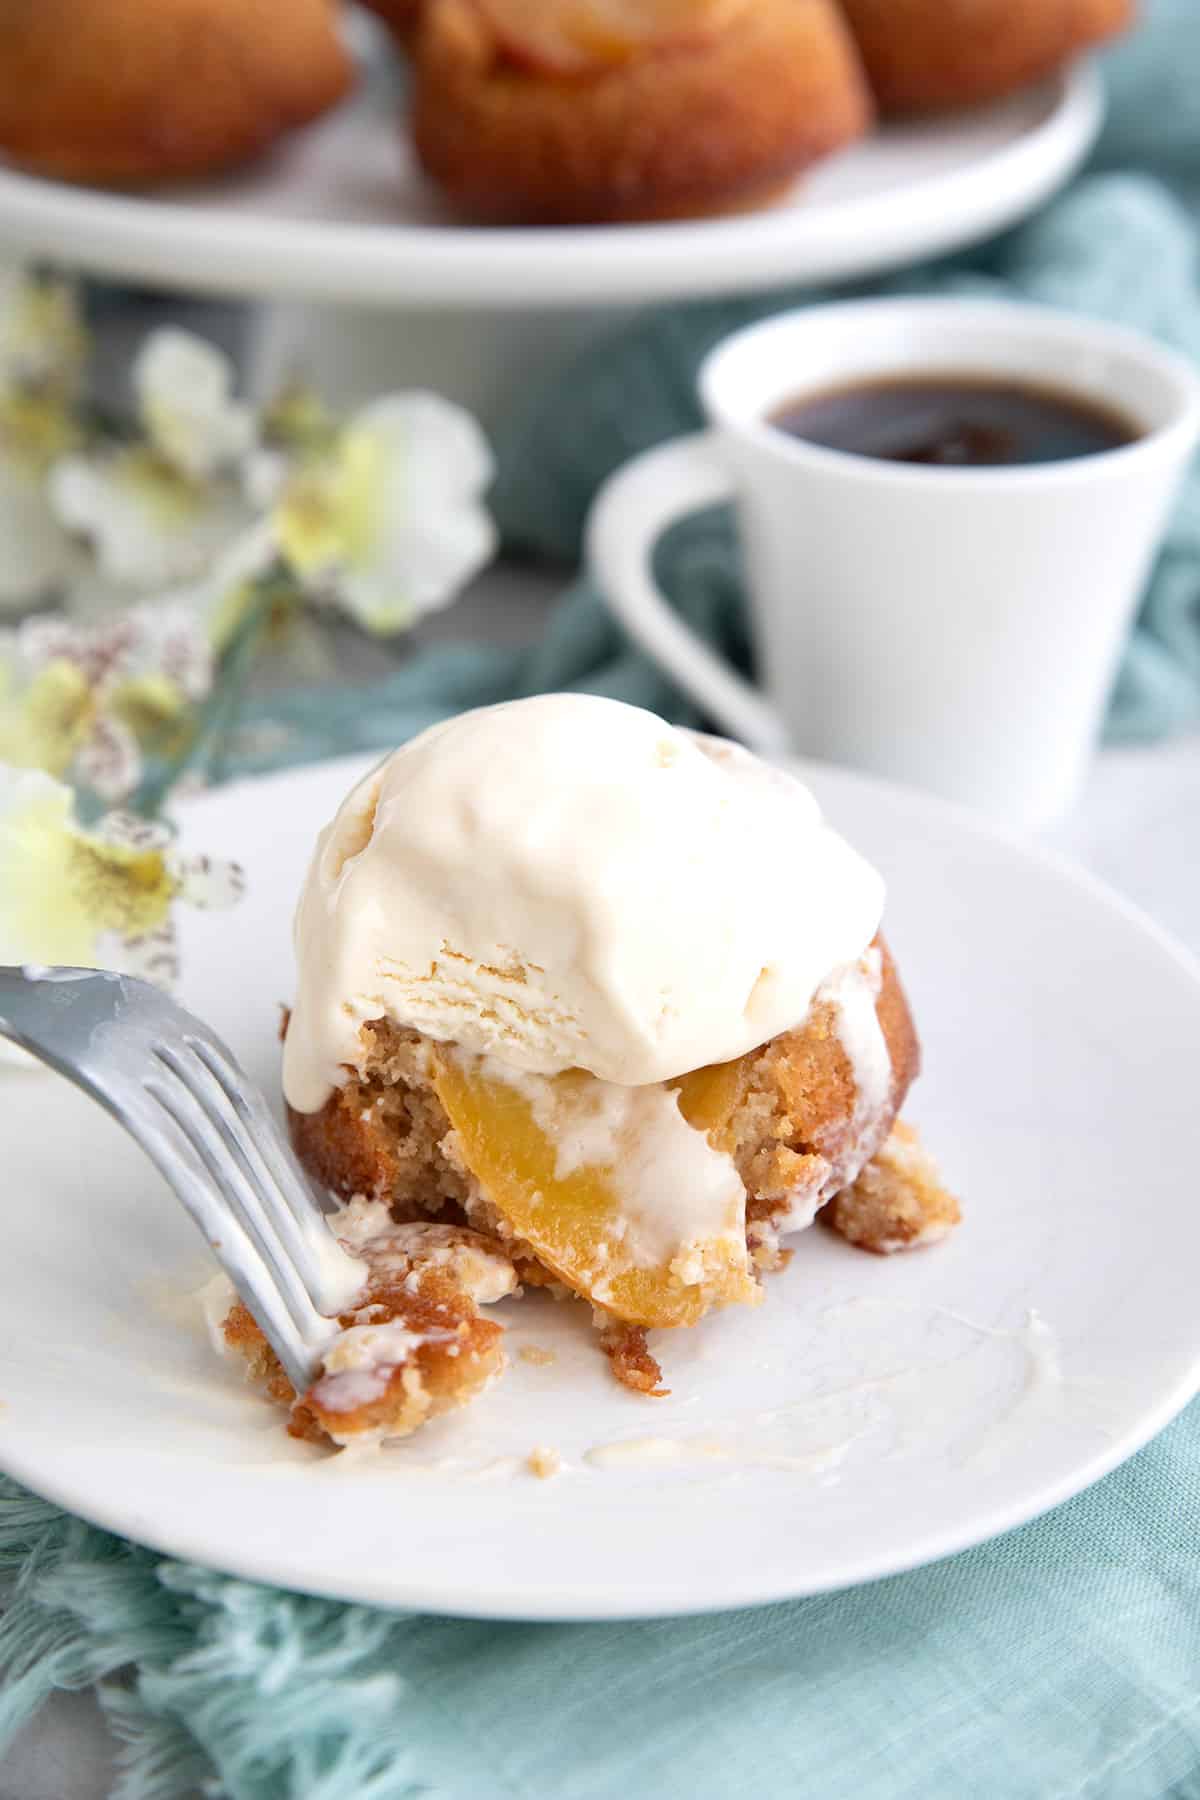 Keto Peach Upside Down Cake with vanilla ice cream on top and a forkful taken out of it.